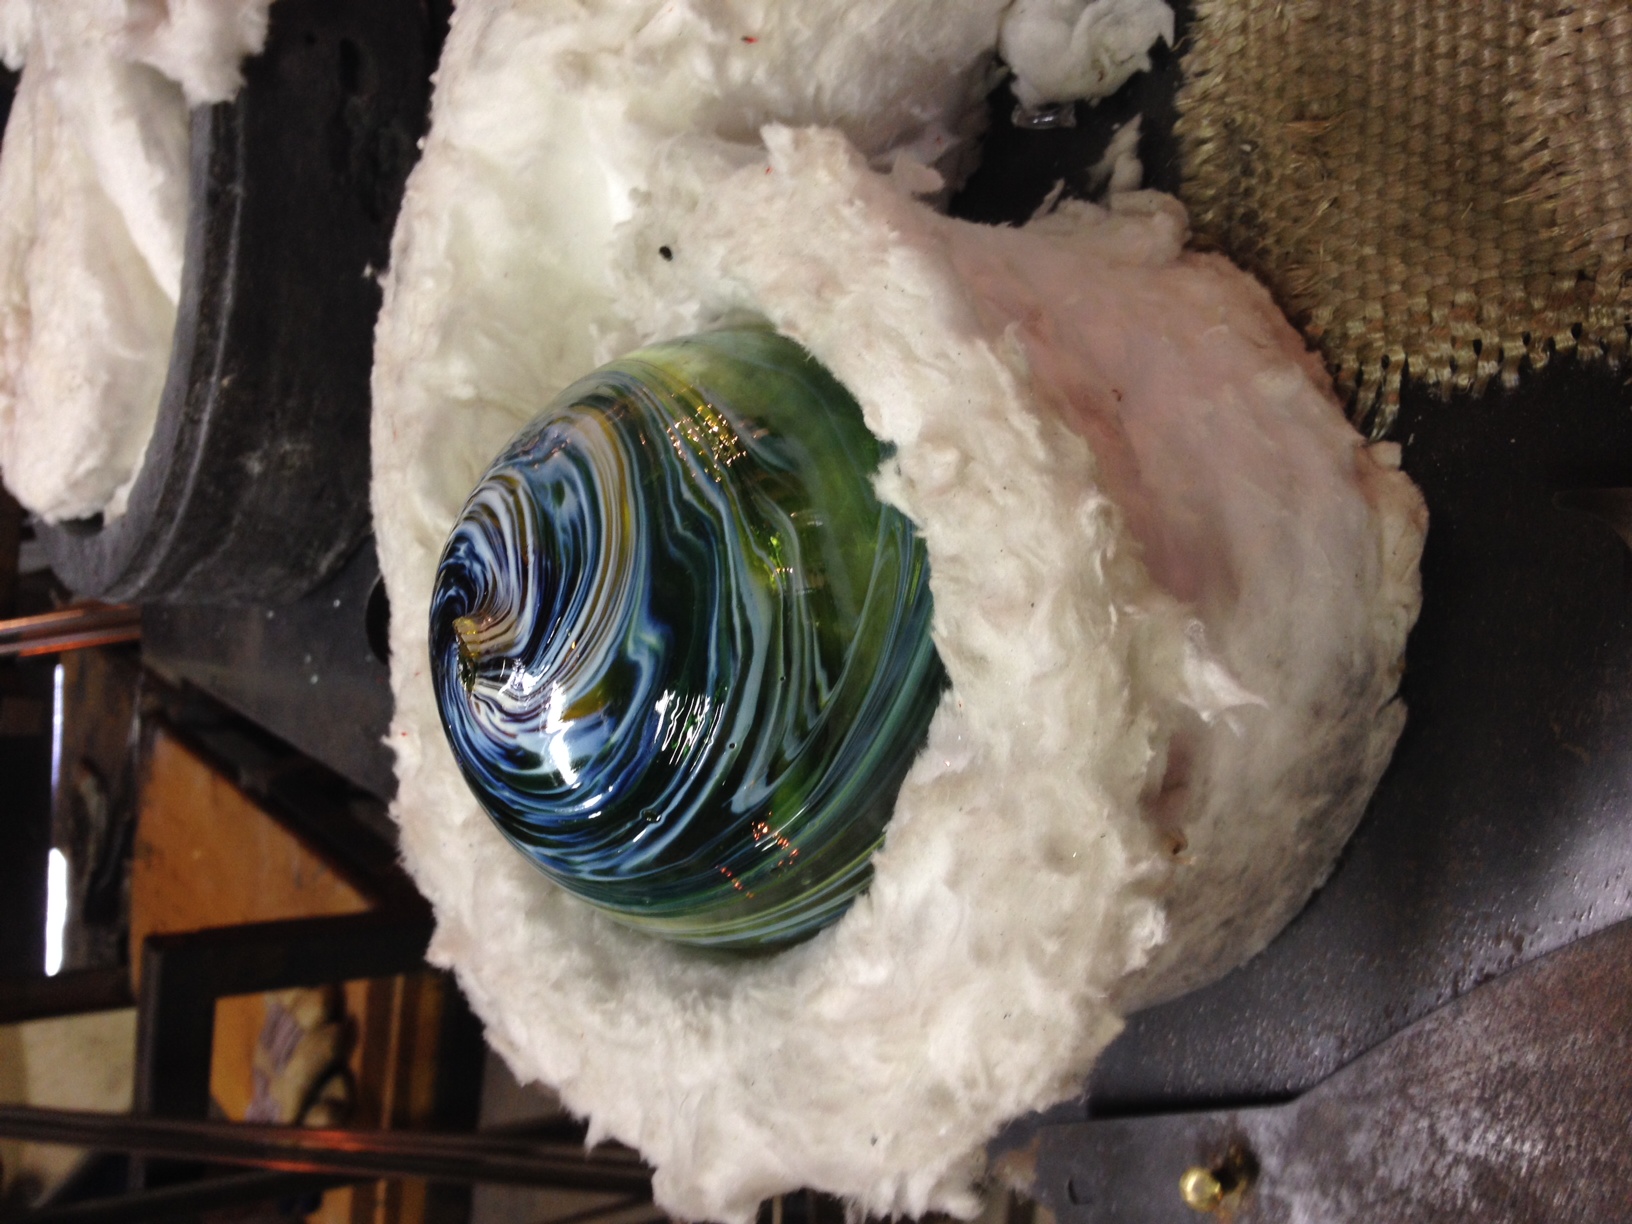 Creating ornaments and memories at Vetro Glassblowing - Just Short of Crazy